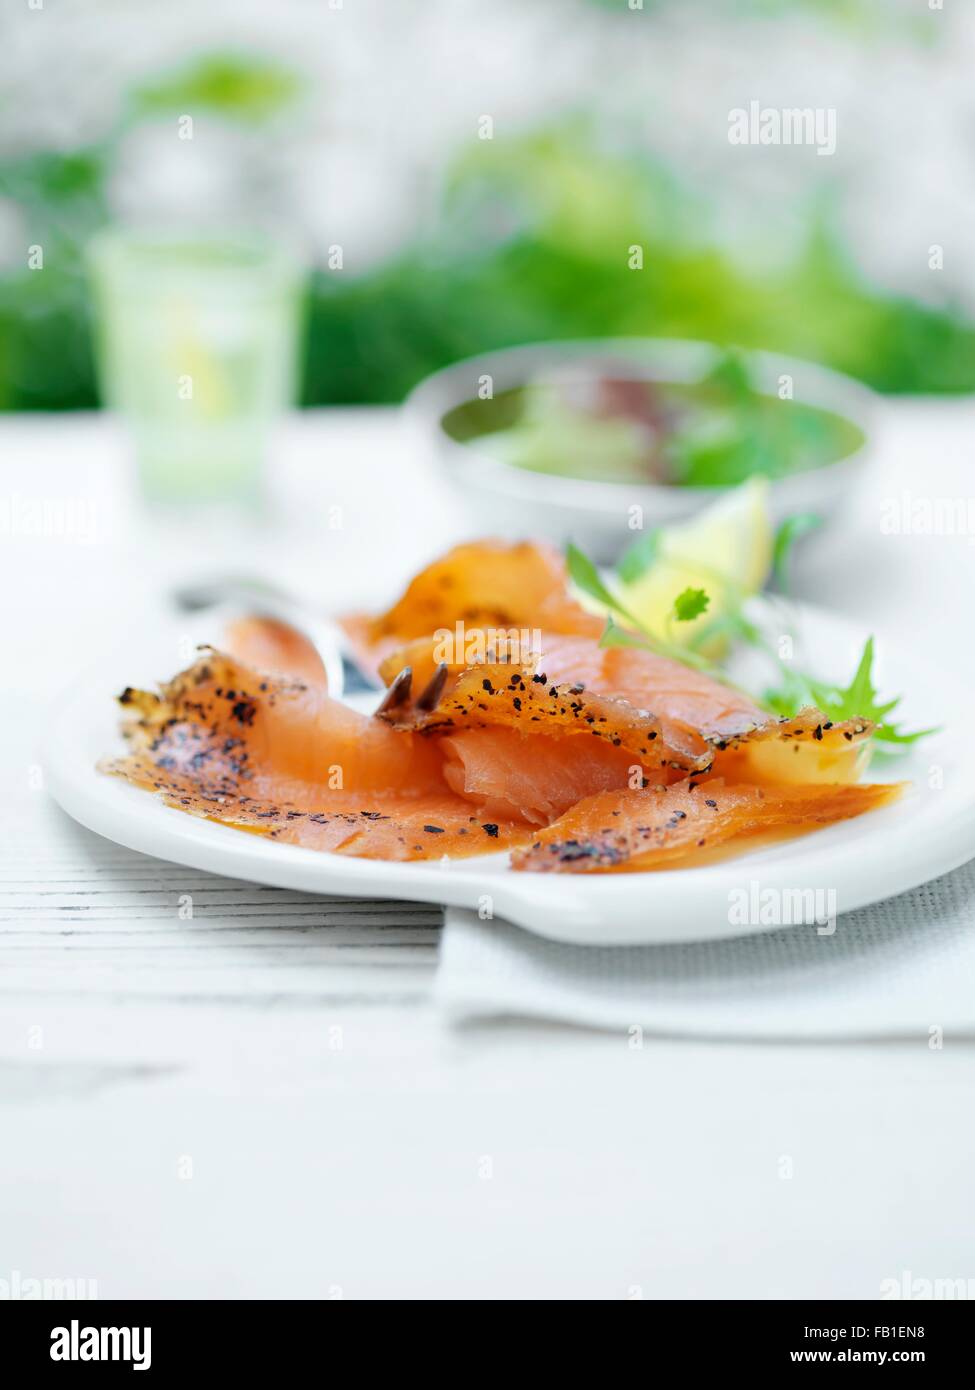 Deli salmon, with sliced lemon and green salad leaves Stock Photo